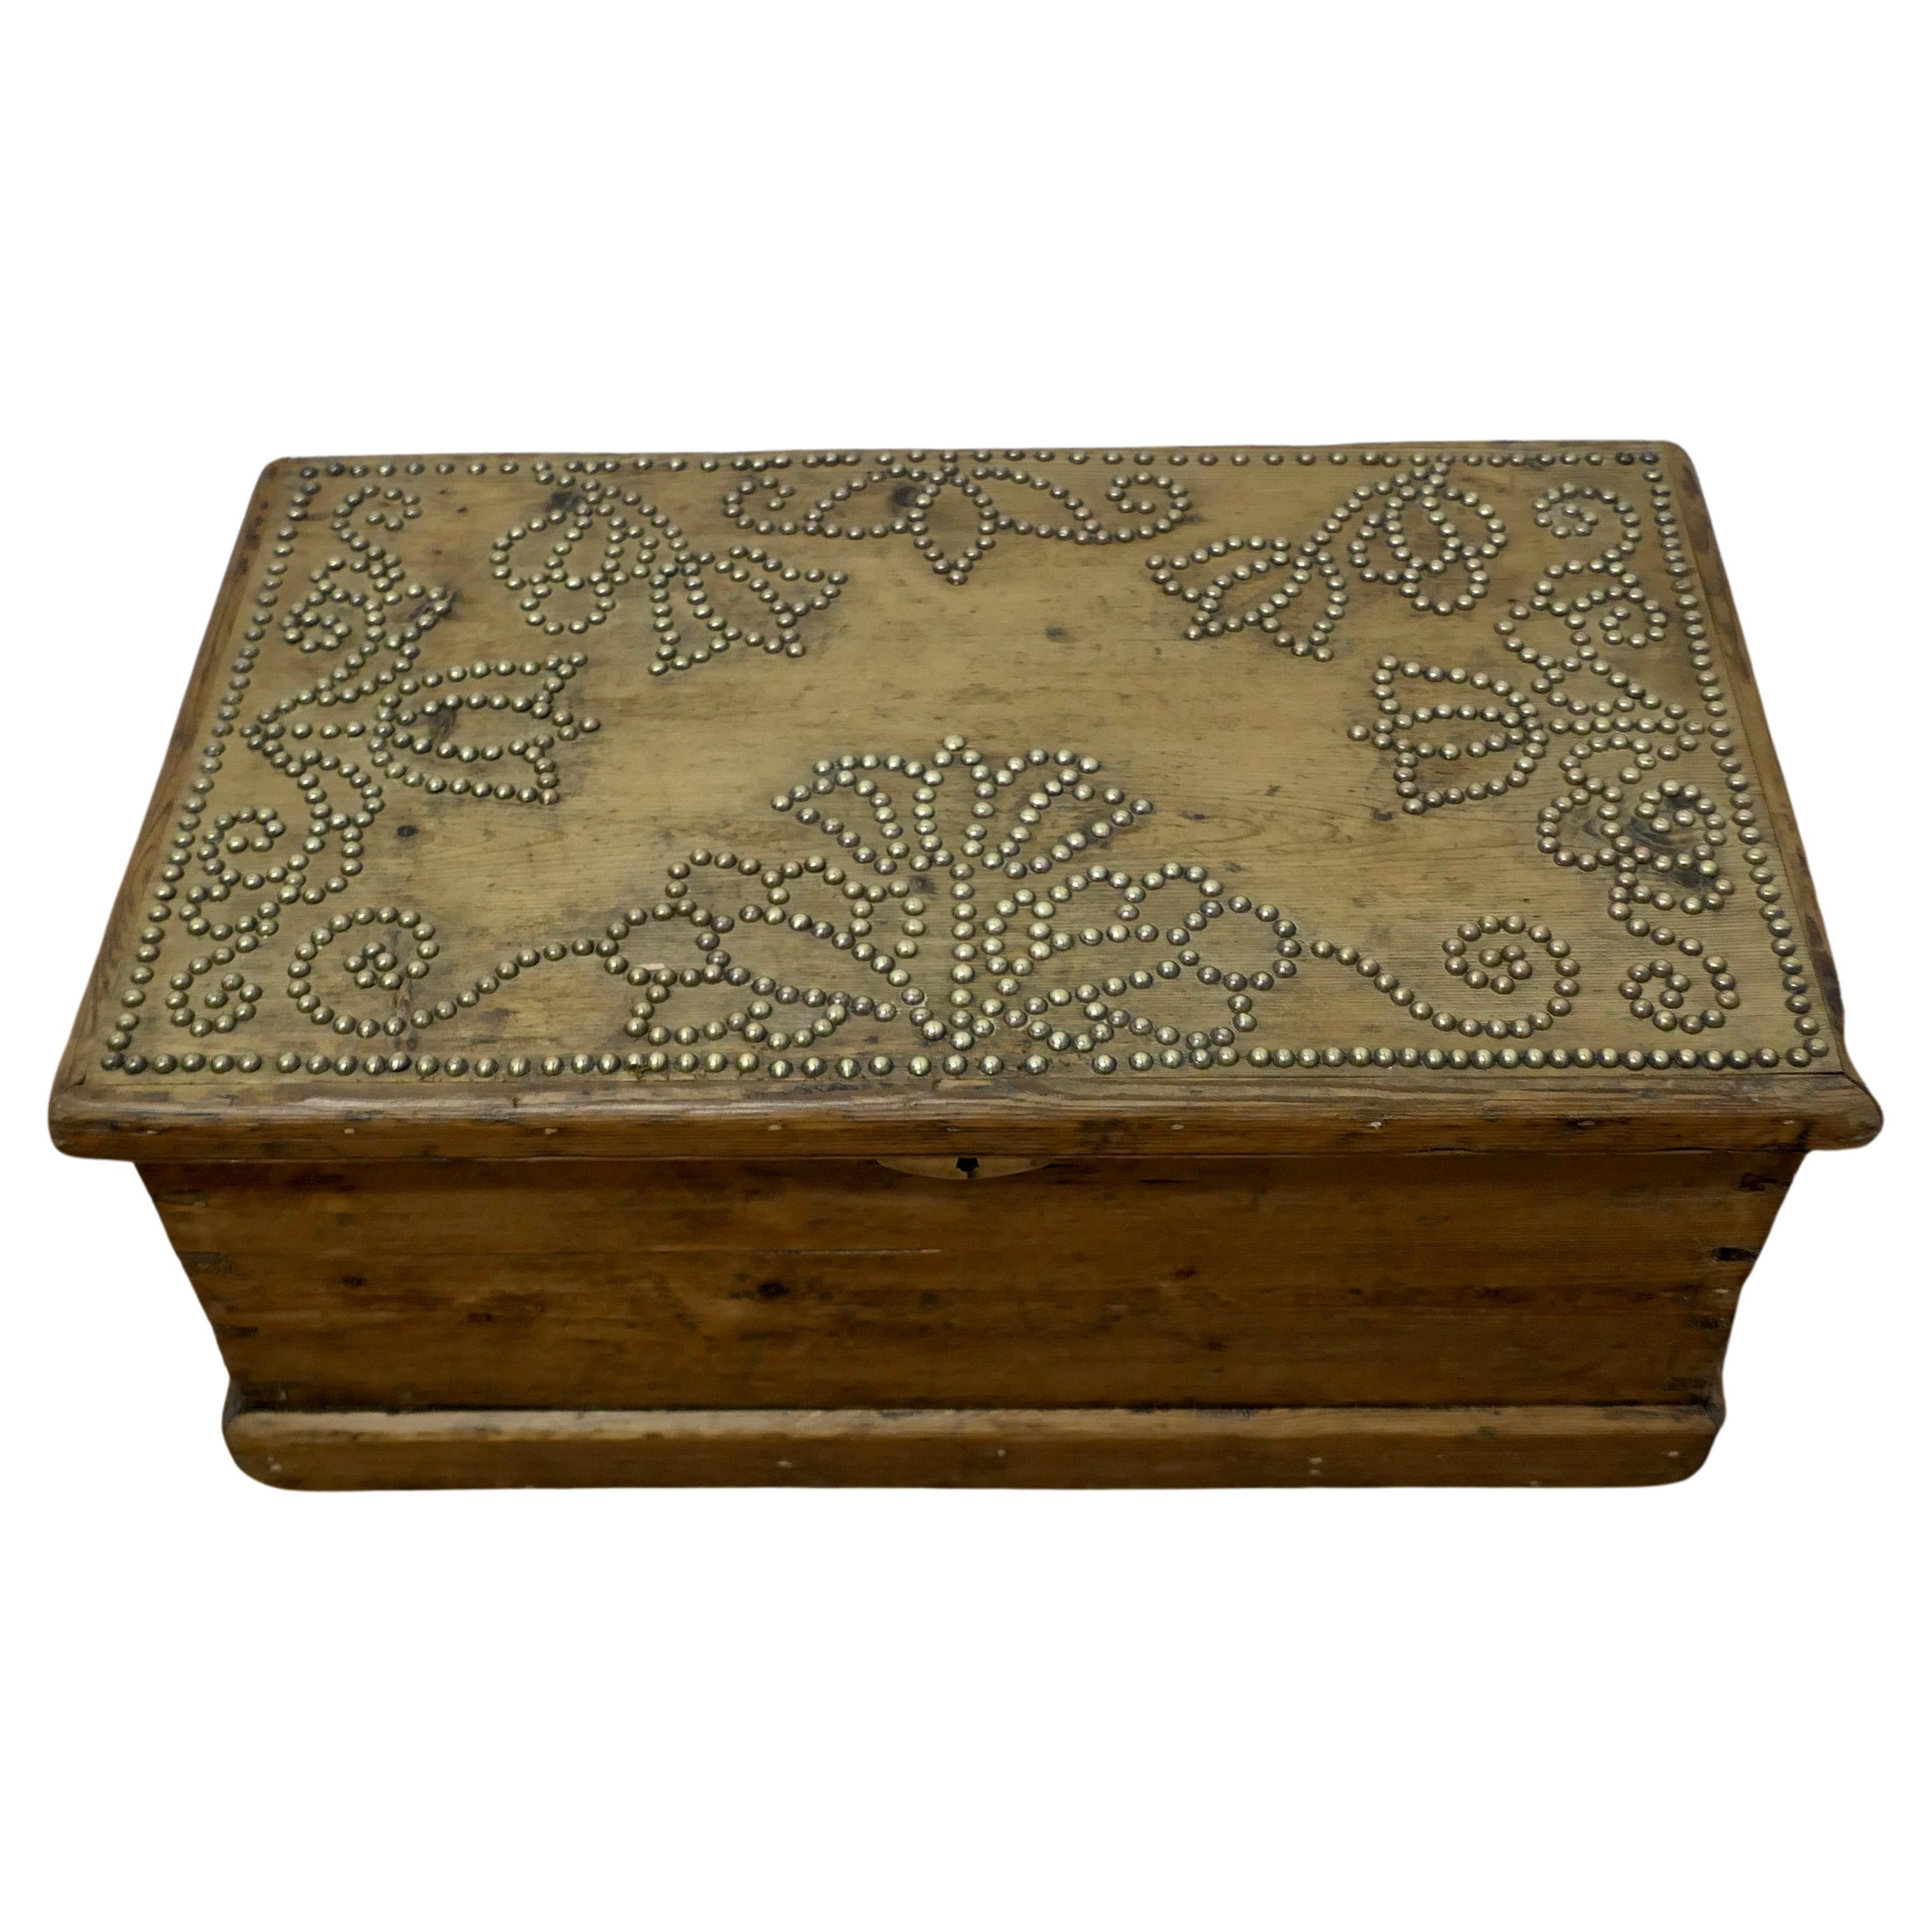 Decorated Victorian Pine Blanket Box with Stud-work Design     For Sale